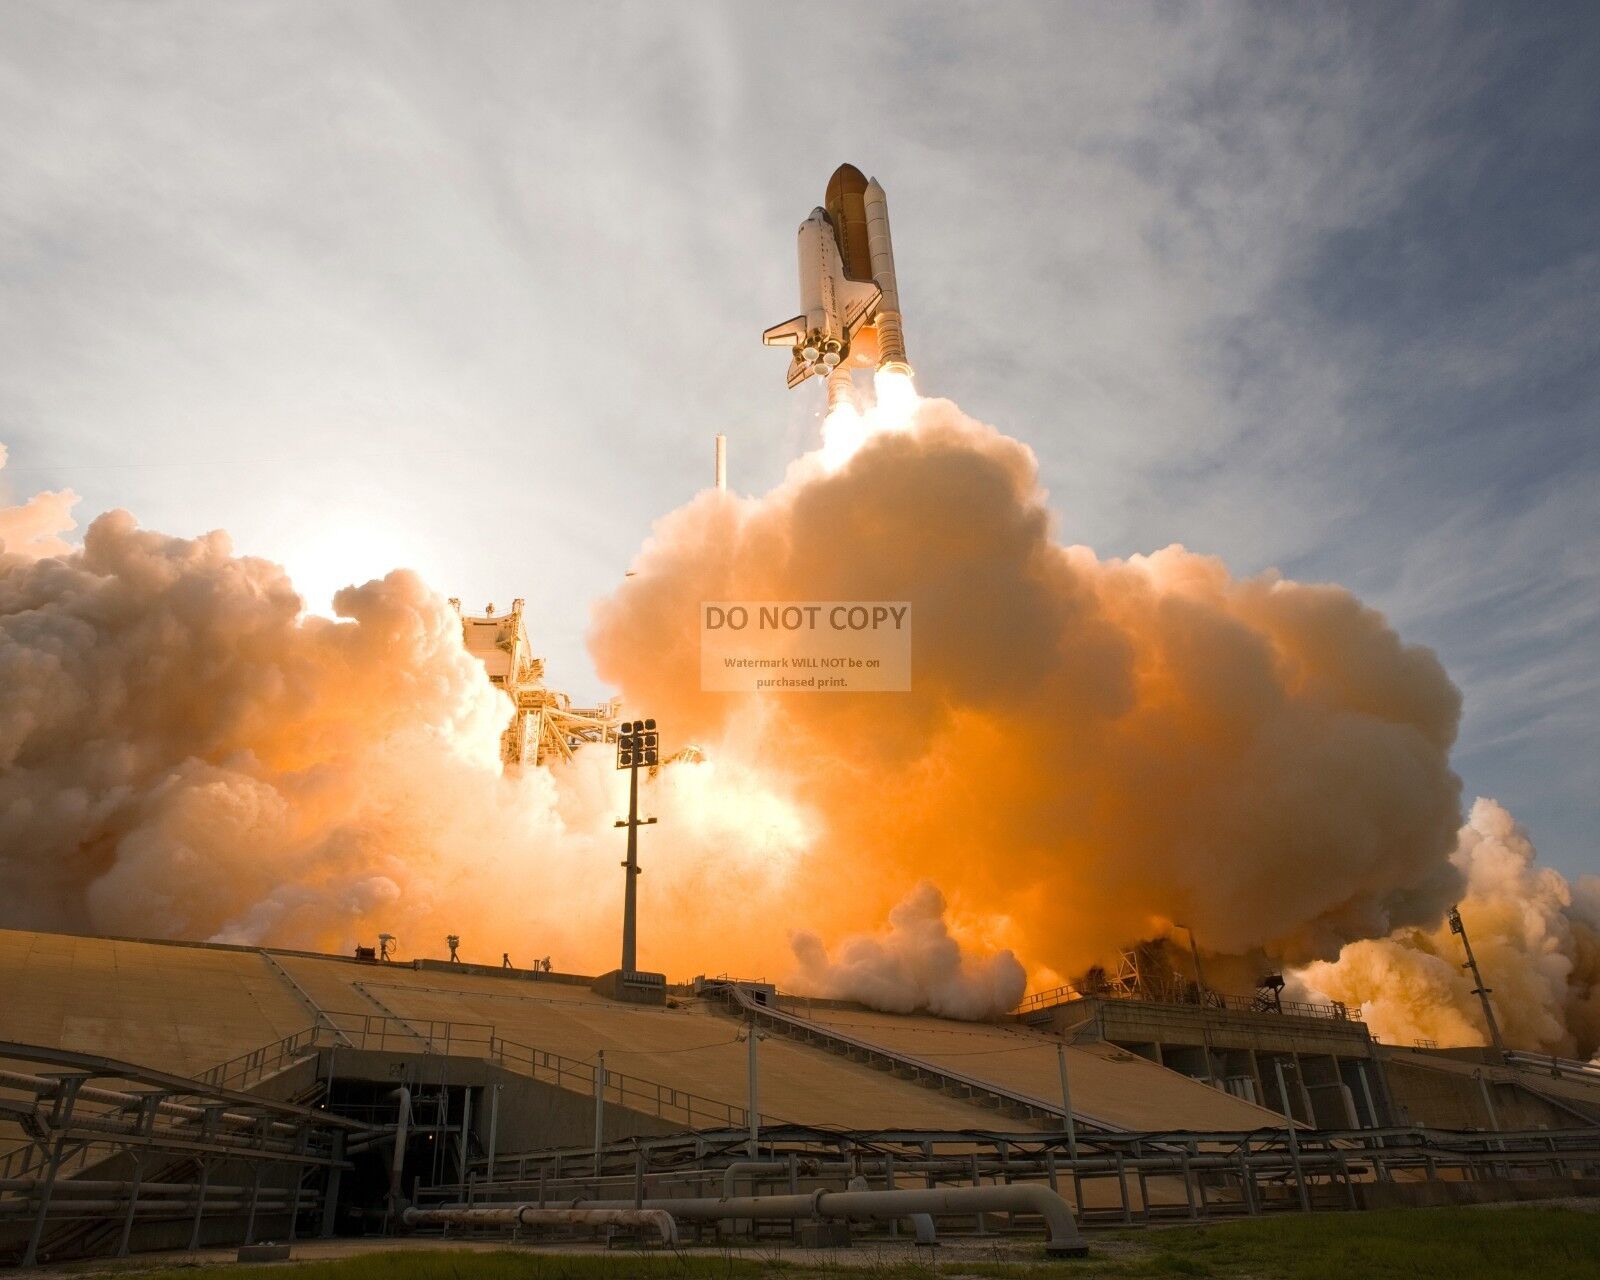 LIFTOFF OF SPACE SHUTTLE ENDEAVOR STS-127 MISSION - 8X10 NASA PHOTO (BB-349)